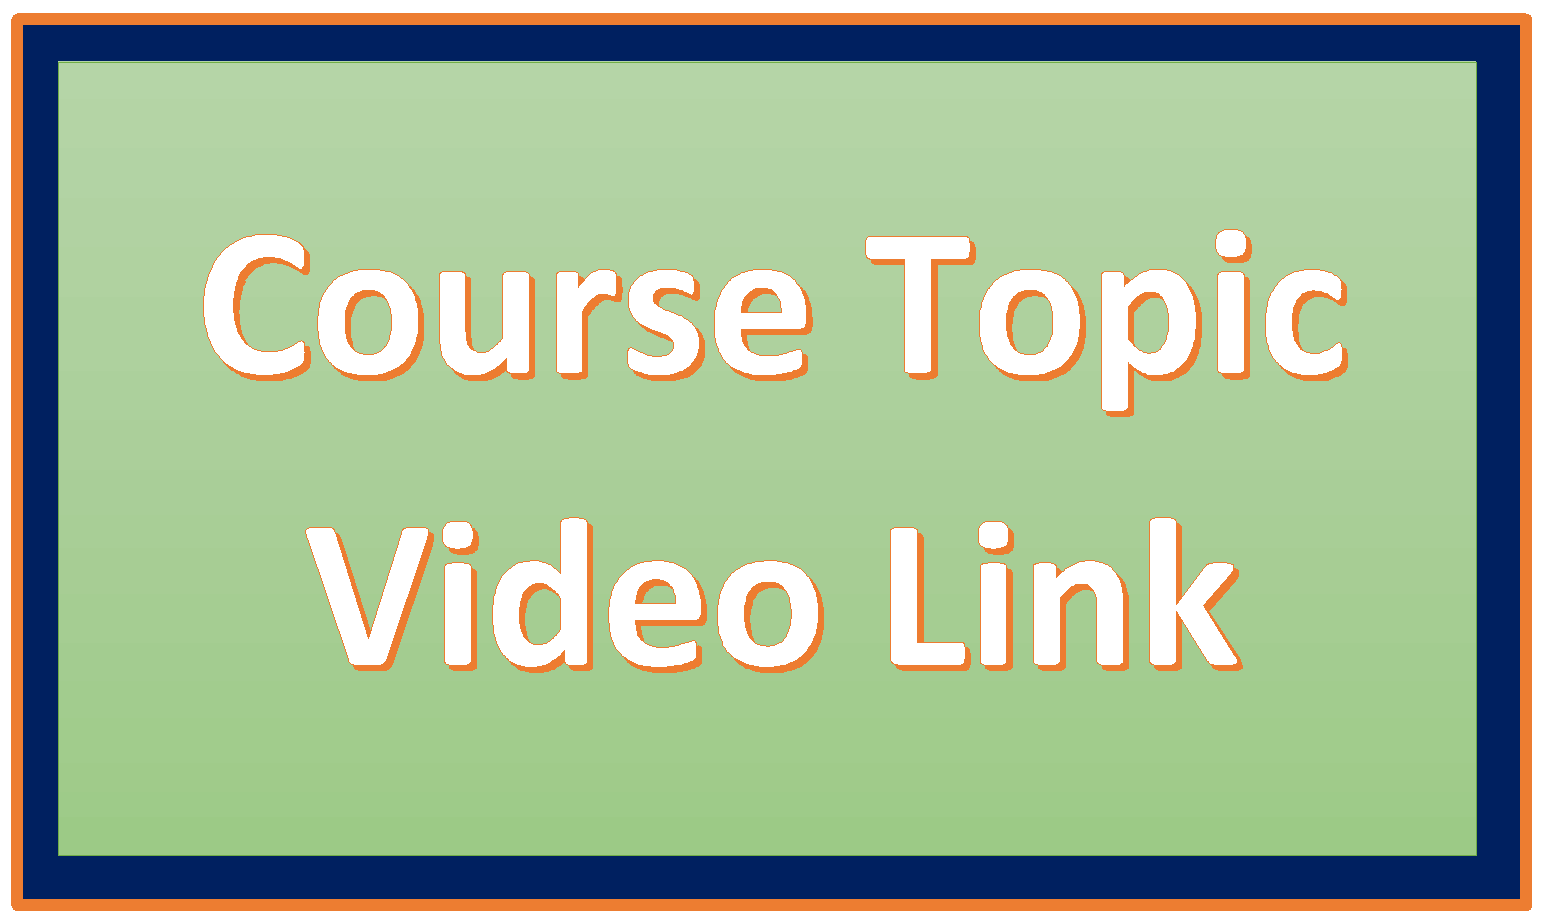 http://study.aisectonline.com/images/FTCP Course Topic Videos Link.png